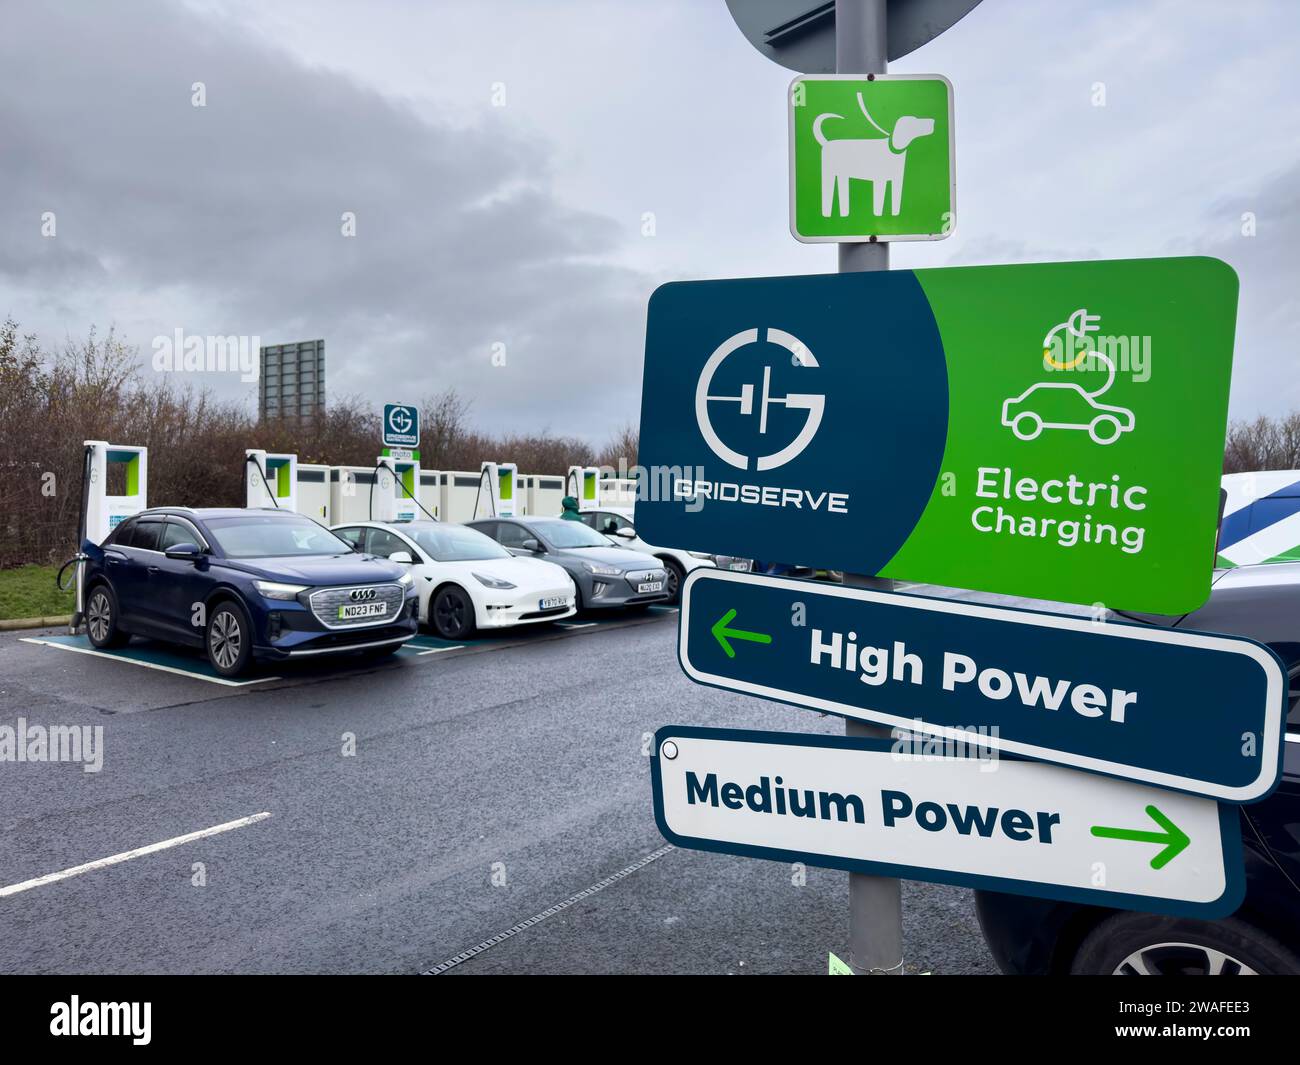 MOTO Services, Wetherby, A1, Yorkshire, England, UK.  Images of the EV electric vehicle charging points by Gridserve at the Wetherby MOTO services on Stock Photo